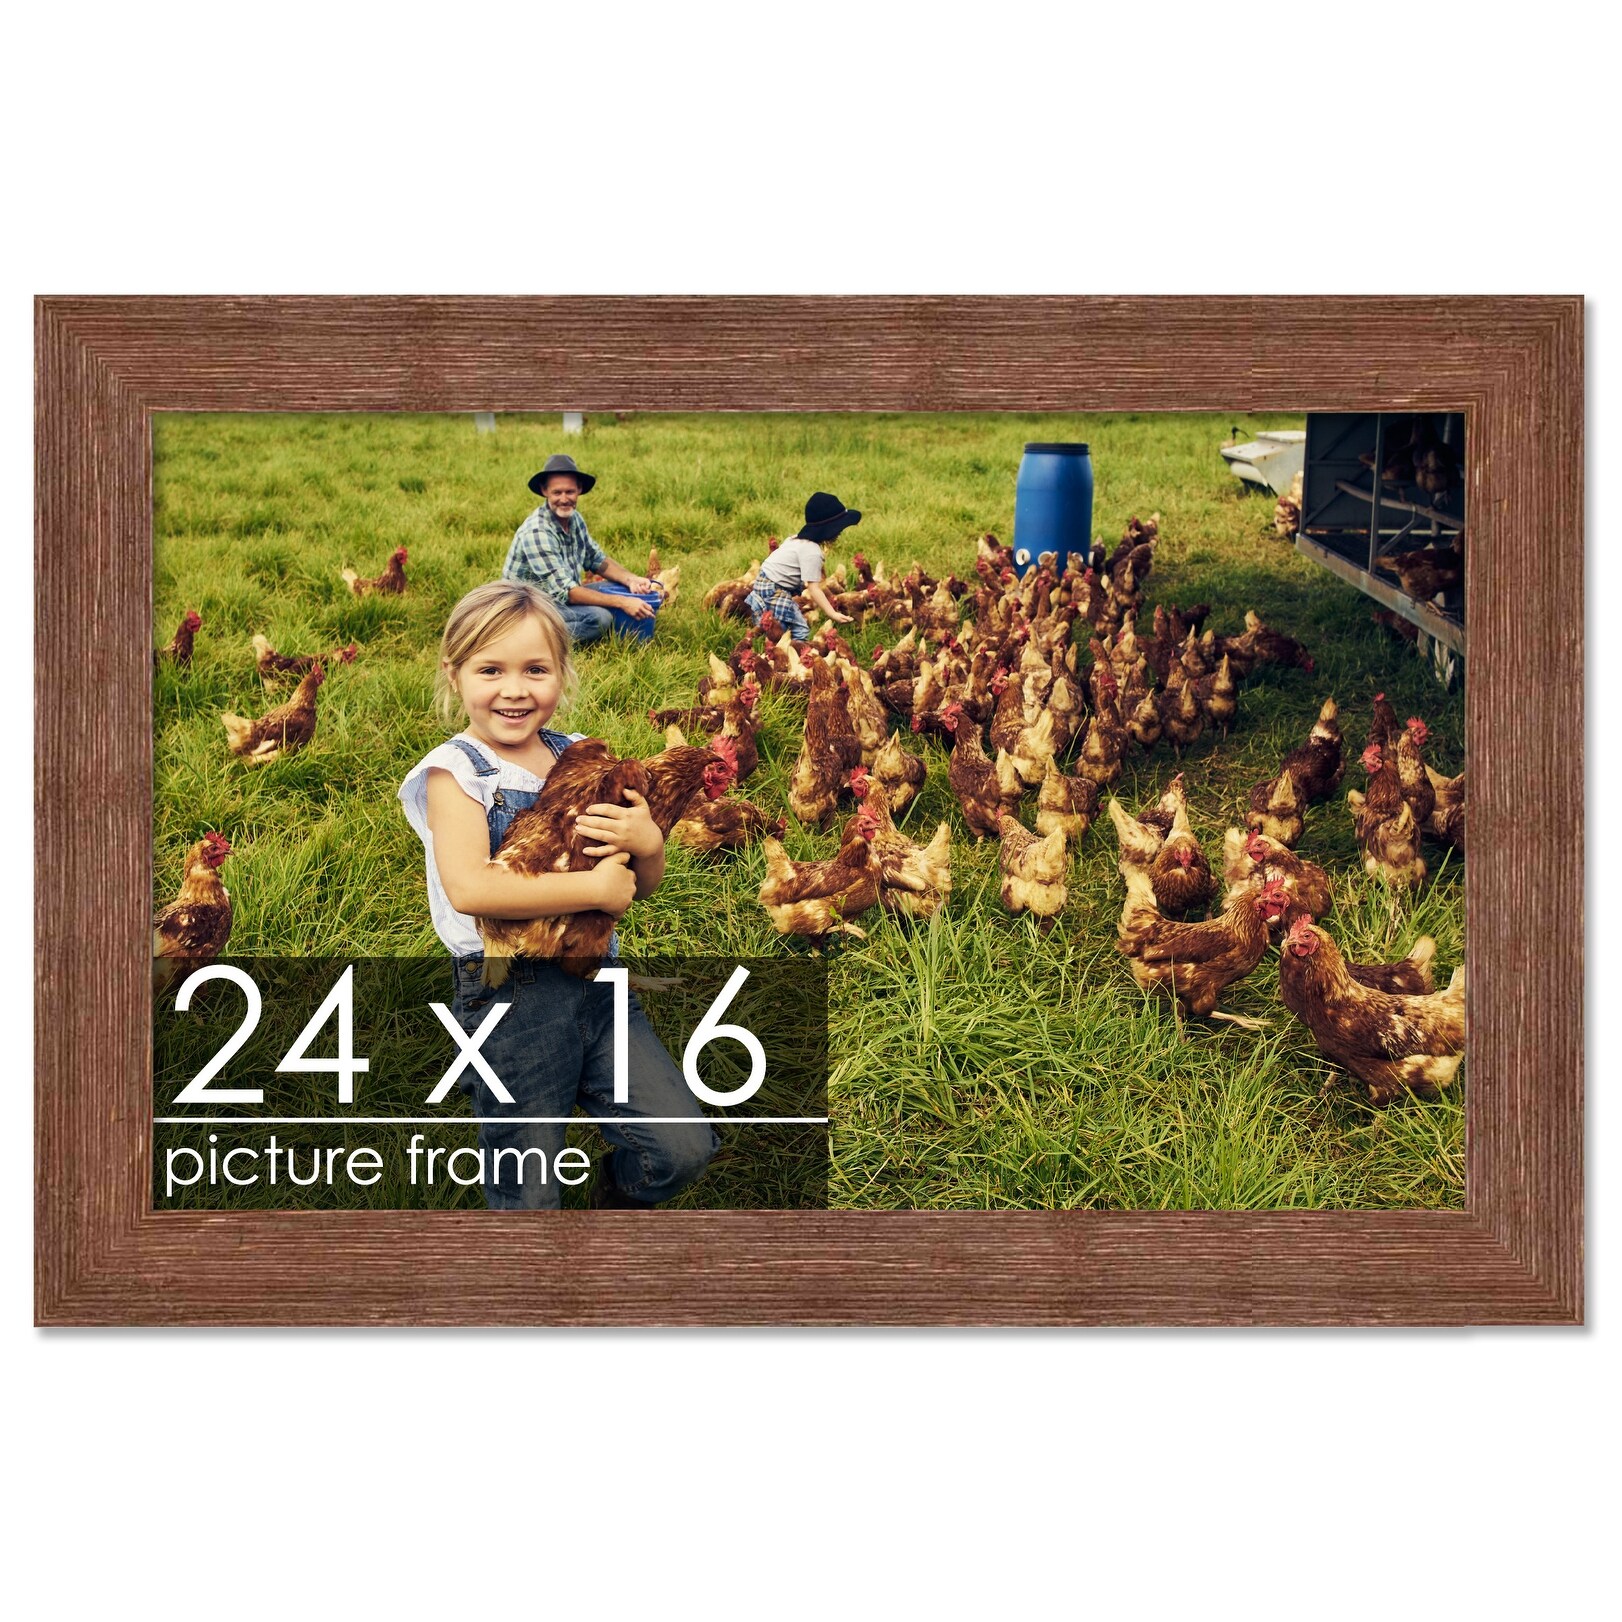 16x24 Frame Brown Barnwood Picture Frame with UV Acrylic Glass